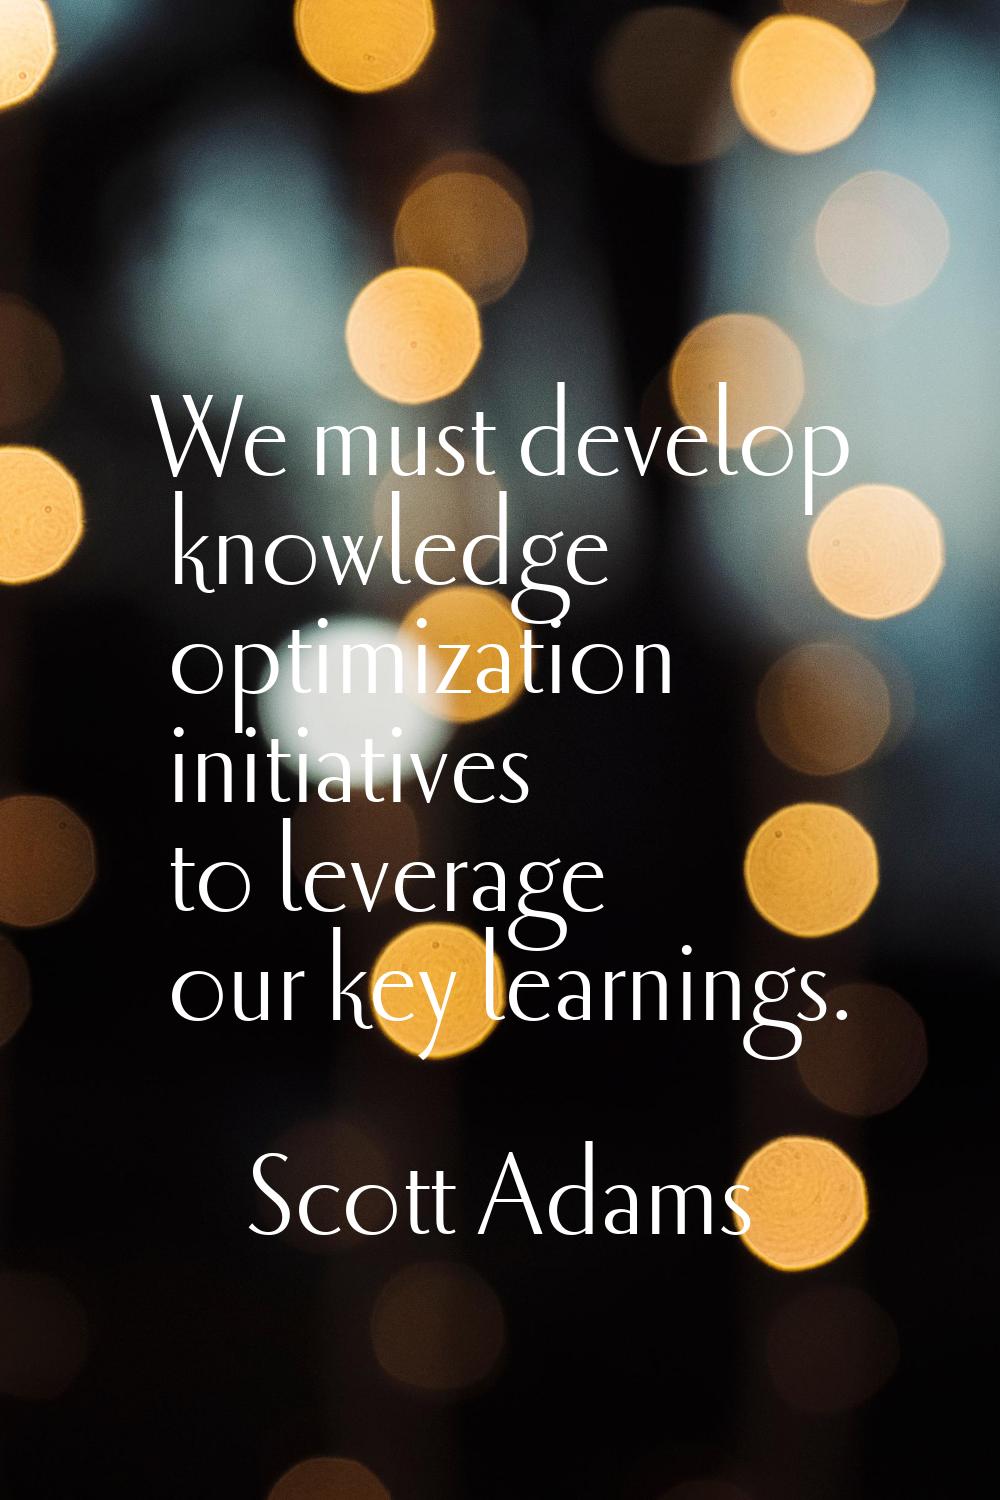 We must develop knowledge optimization initiatives to leverage our key learnings.